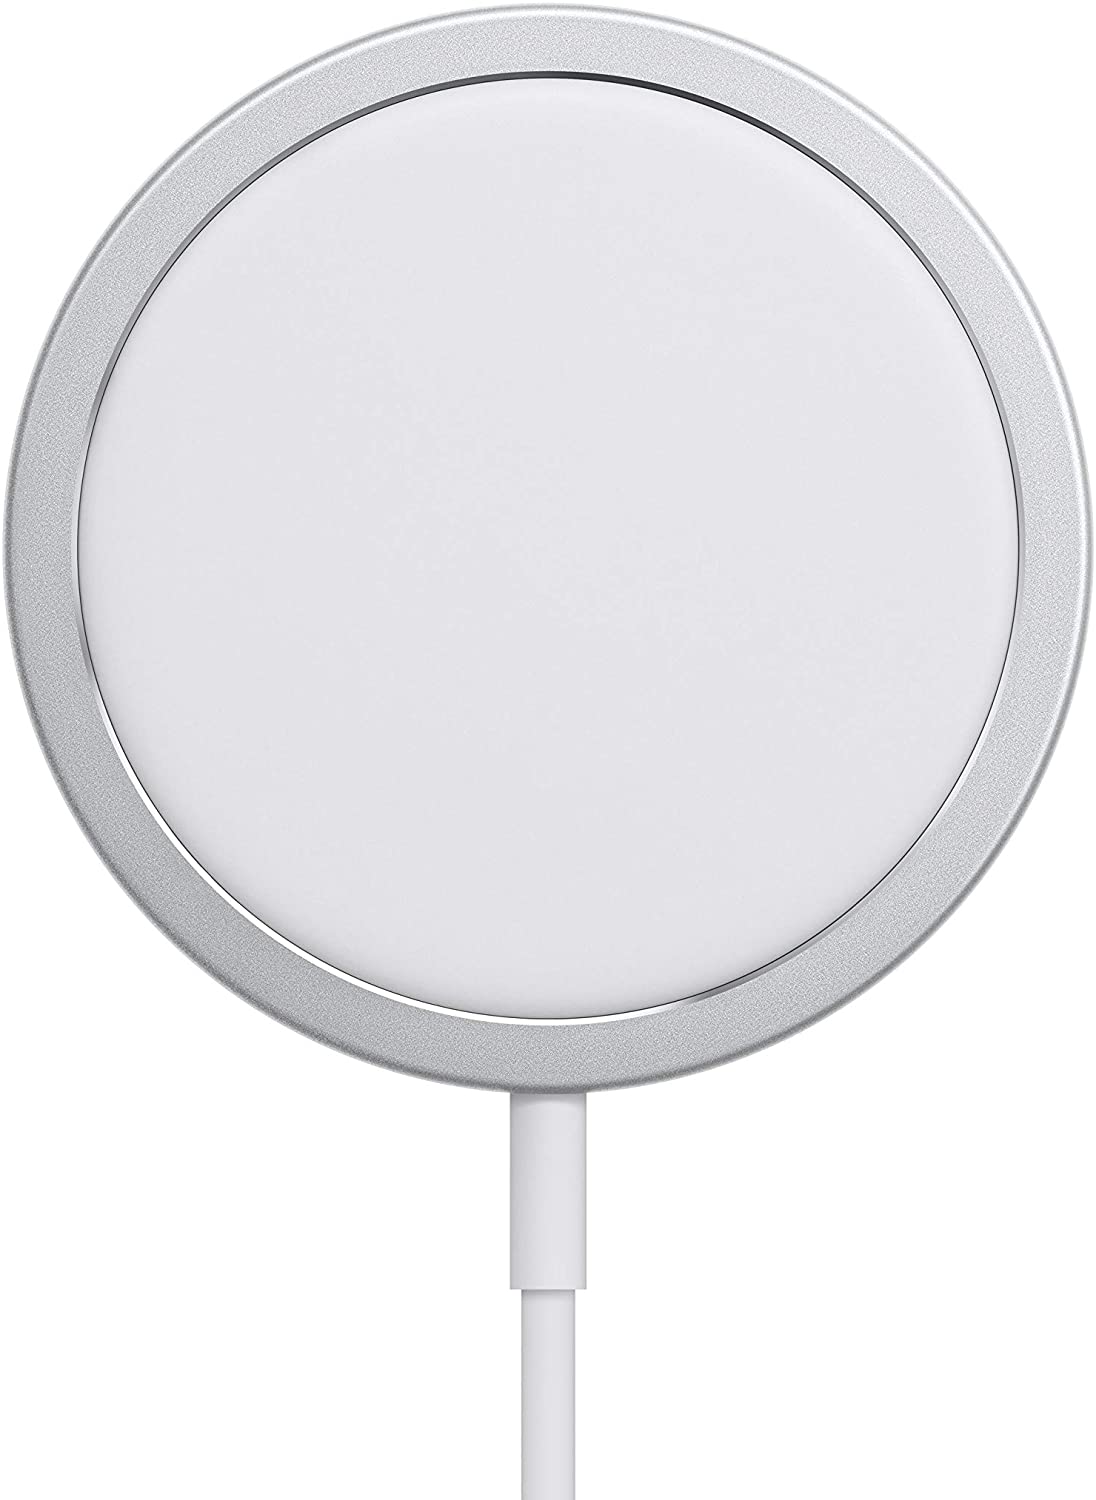 The iPhone 12’s new MagSafe wireless charger works with some Android devices